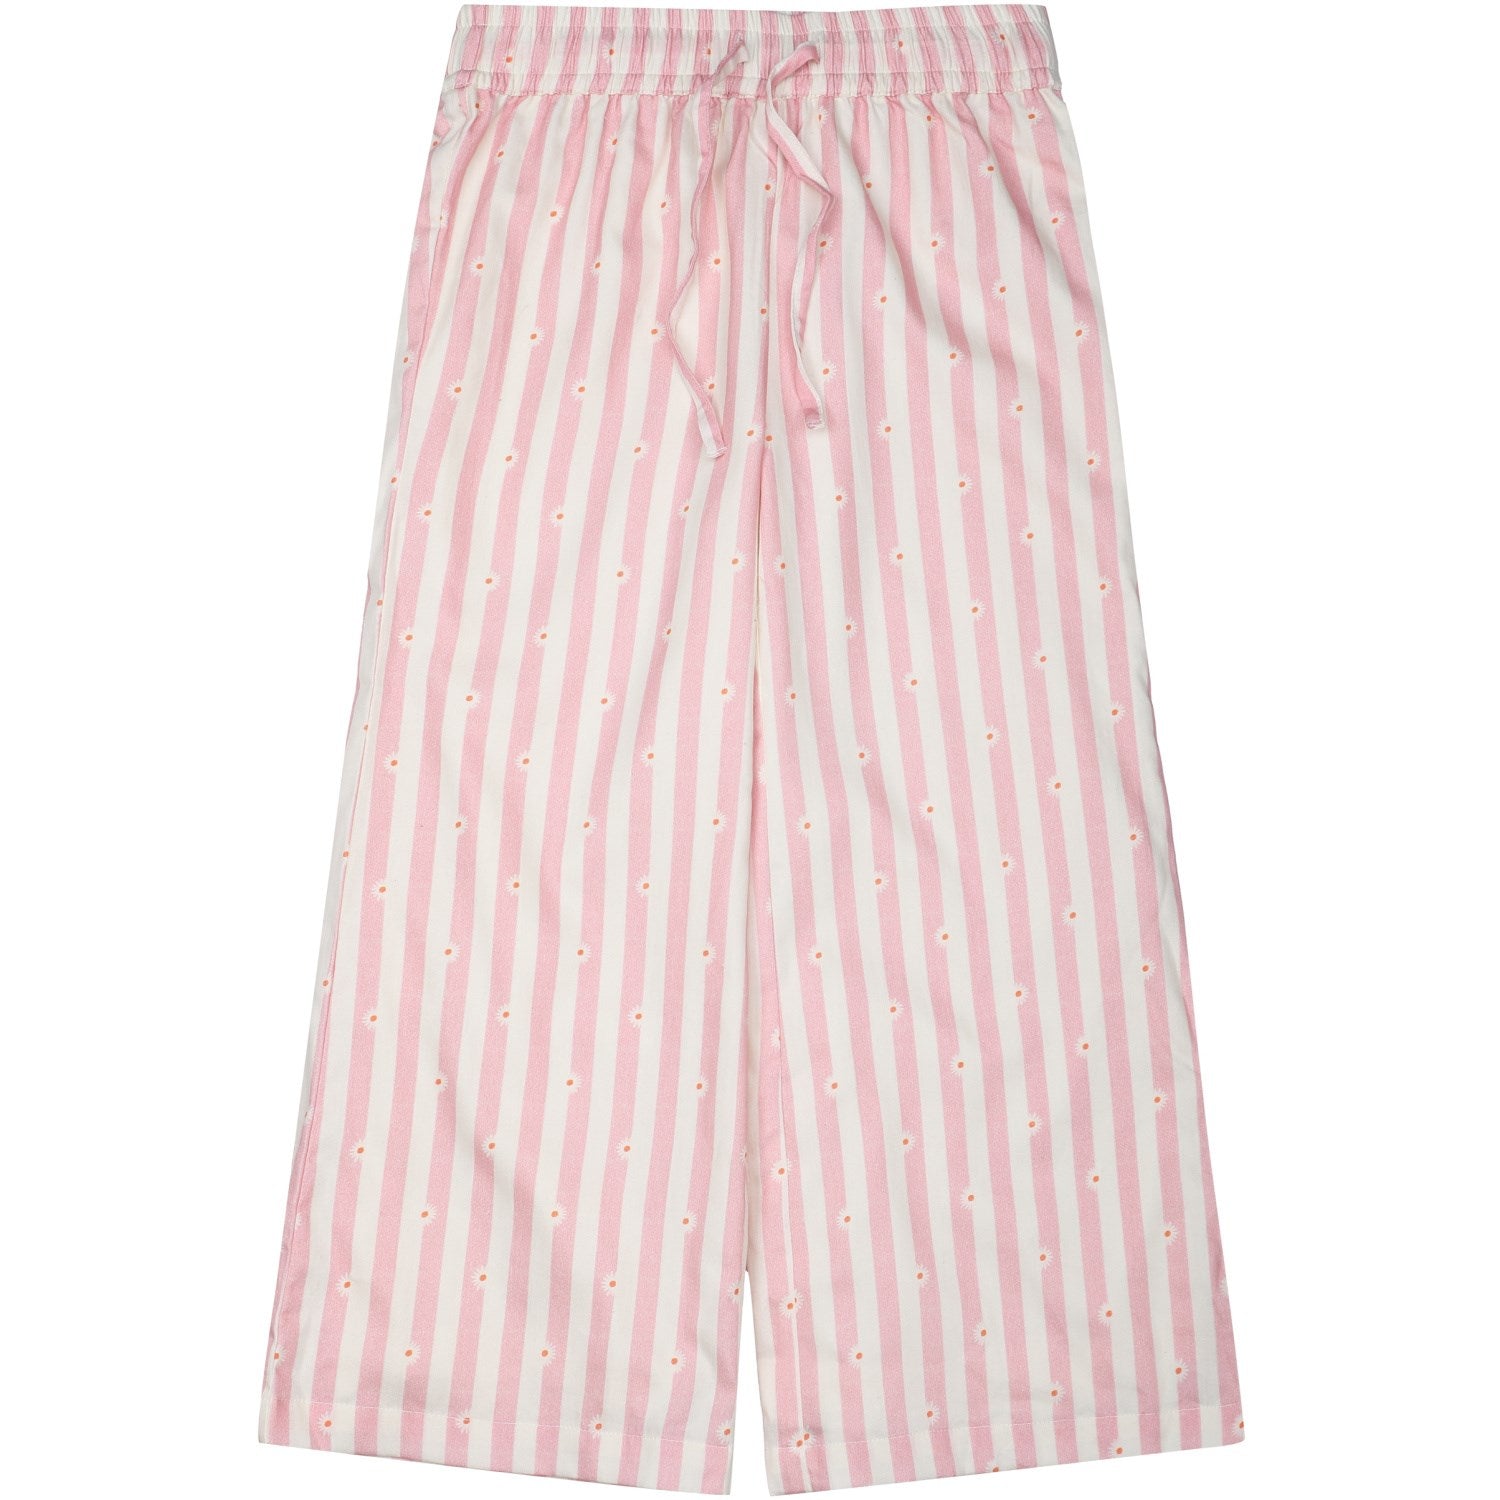 The New Pink Nectar Jin Wide Pants